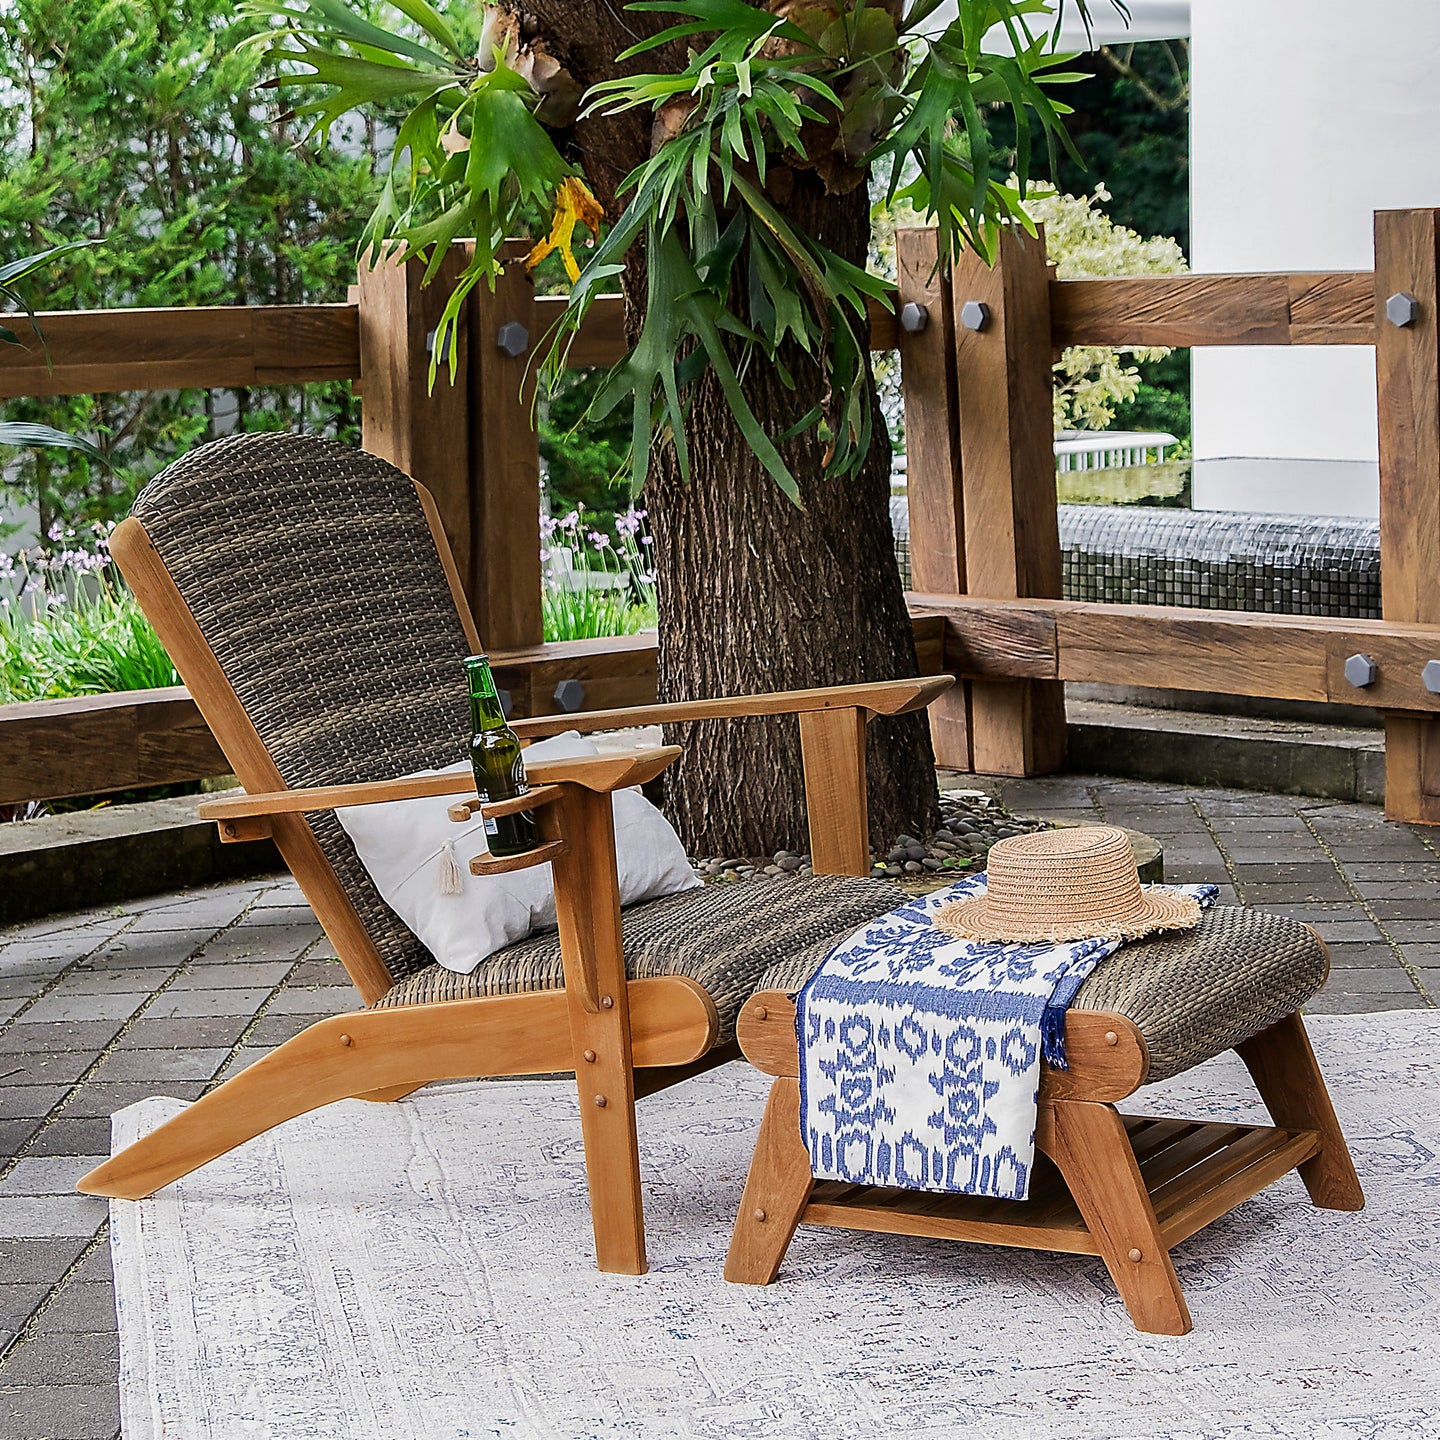 The Adirondack chair with cup holder - Your Perfect Backyard Escape